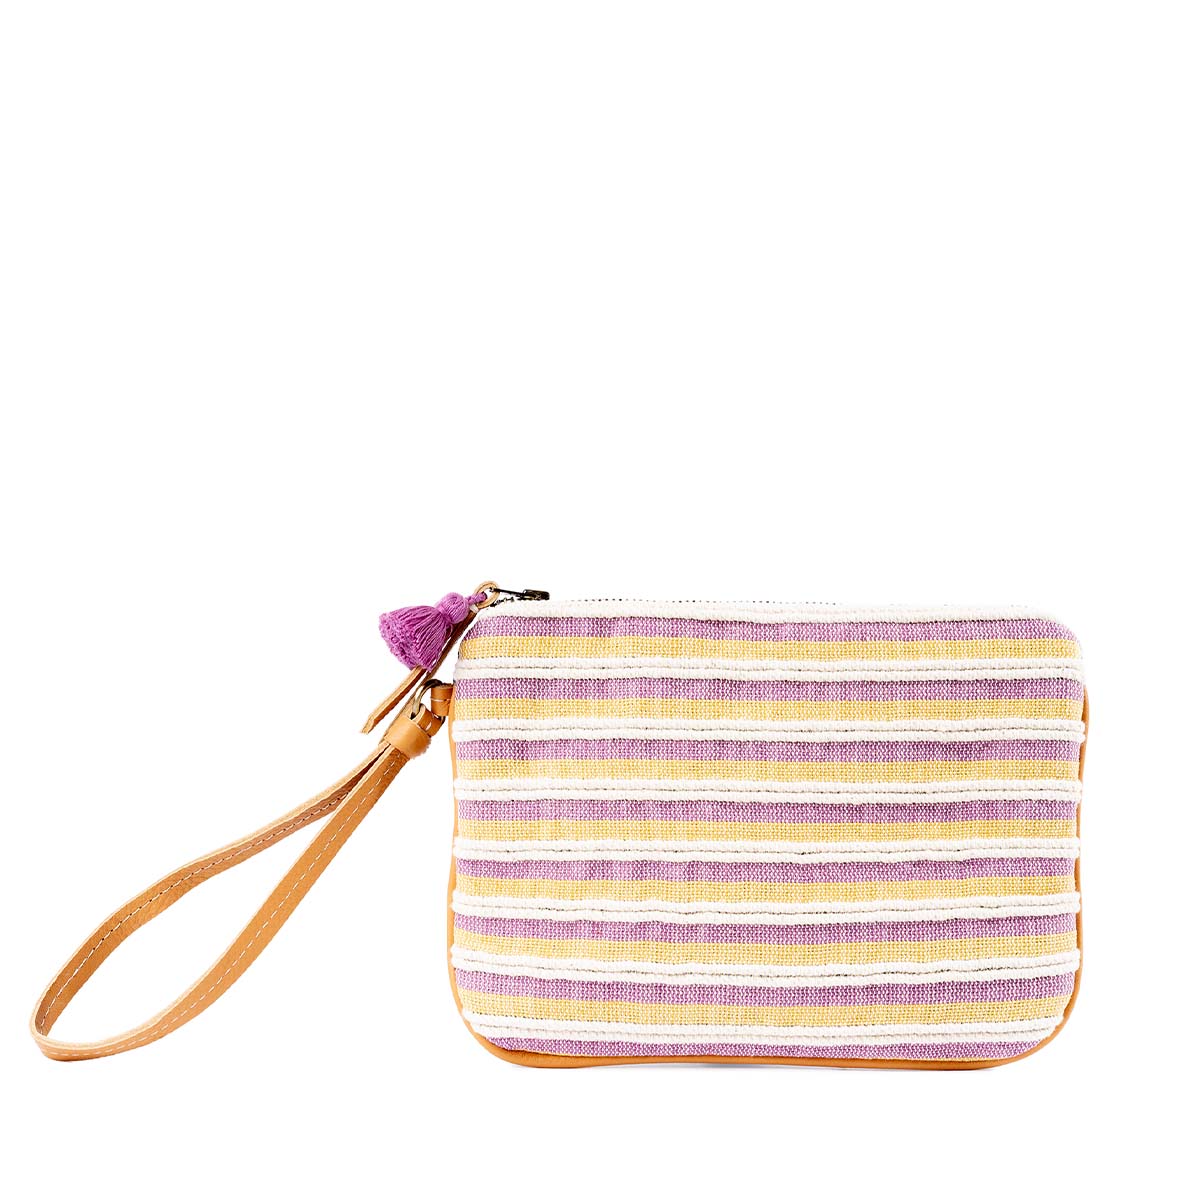 Front of the hand woven artisan Mini Lily Wristlet in Cream Soda pattern. The pattern has thin horizontal stripes of pastel yellow, beige, and pink. It has a leather wrist strap and a mini pink tassel.